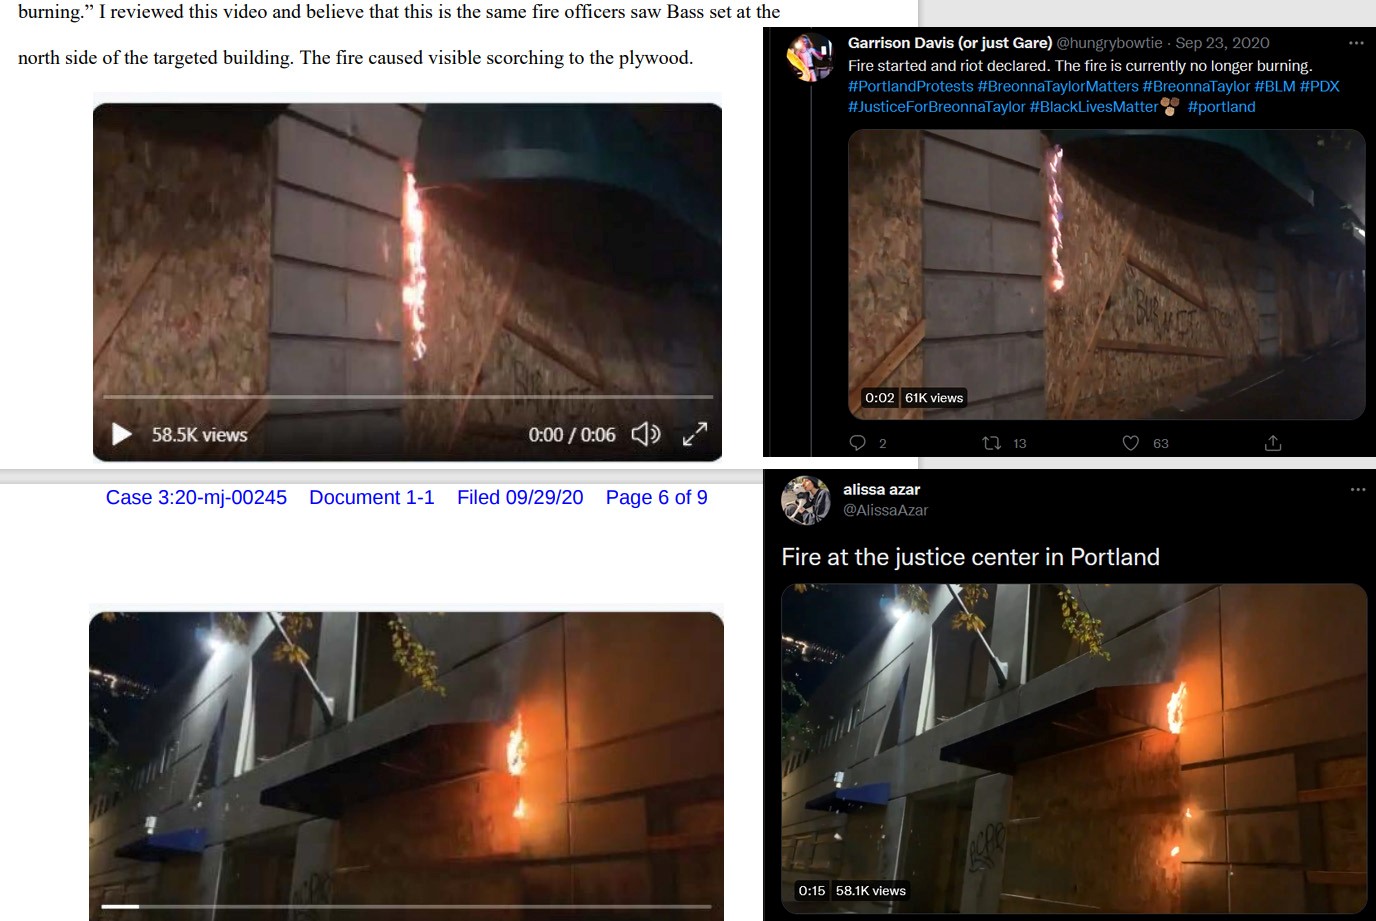 proof alissa azar and former DSA member Garrison Davis filmed video used by the state to prosecute Cyan Bass for arson